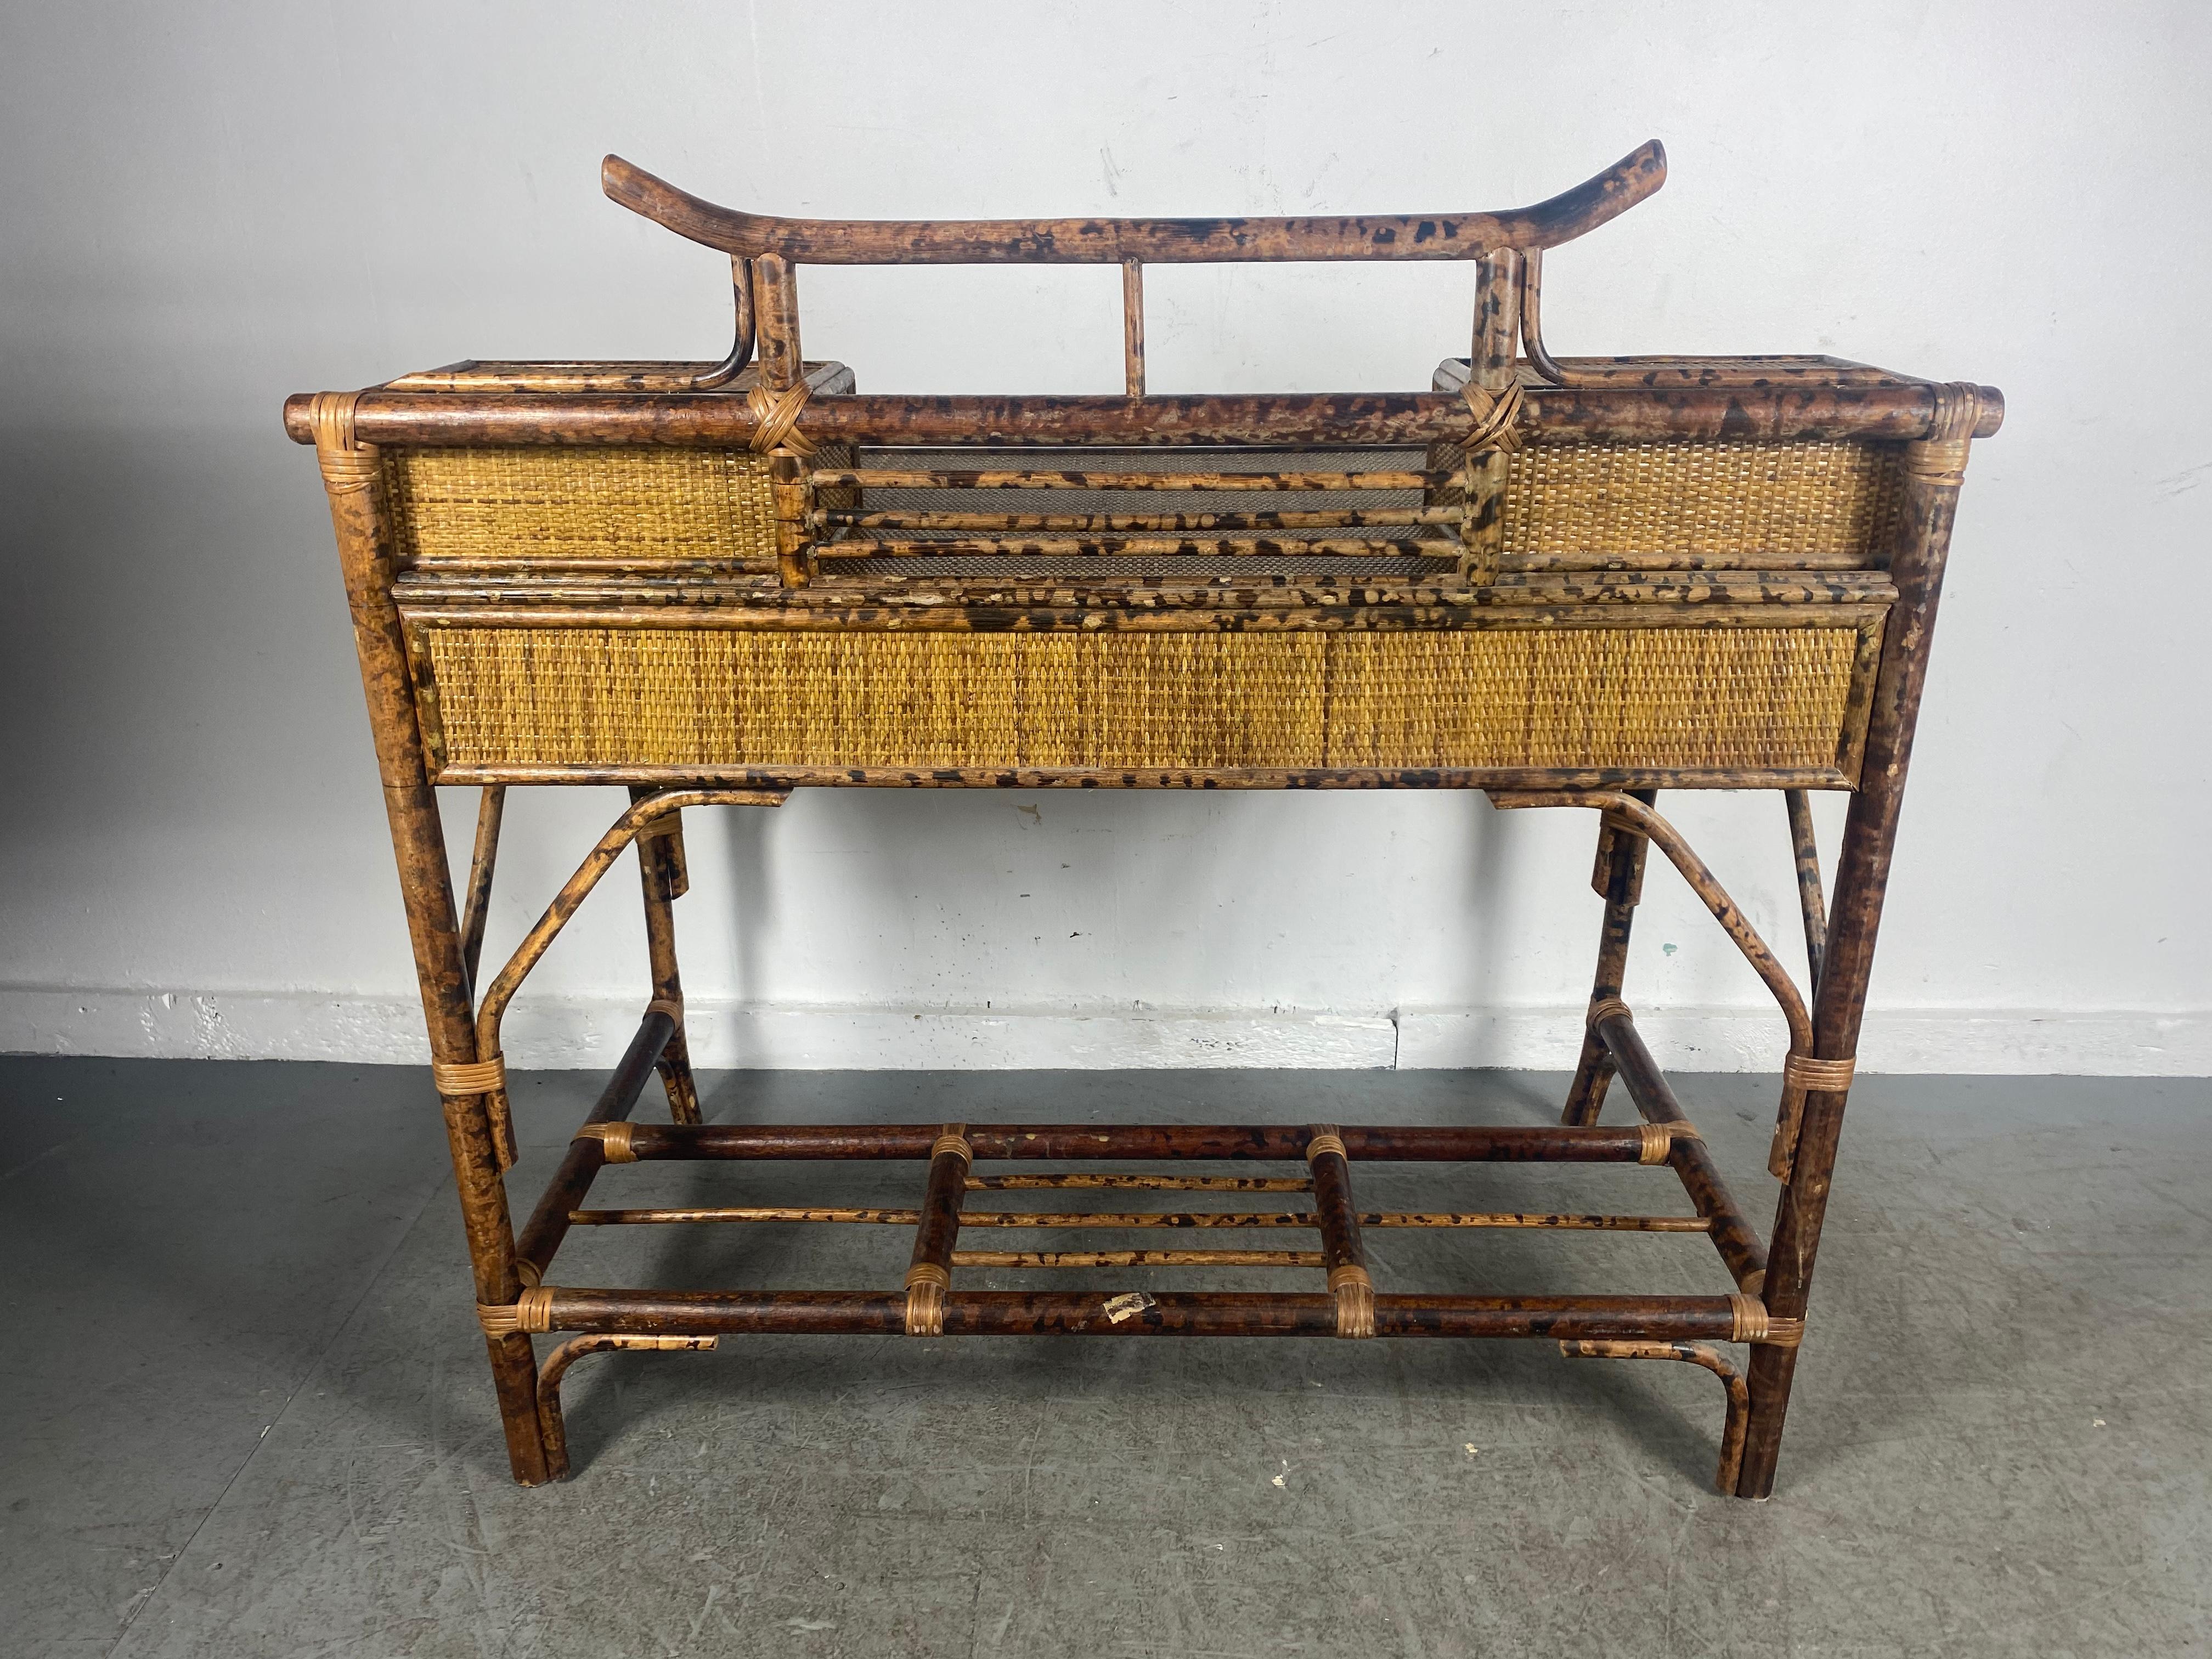 Late 20th Century Bamboo and Rattan Pagoda Style Writing Desk, , for Bloomingdales